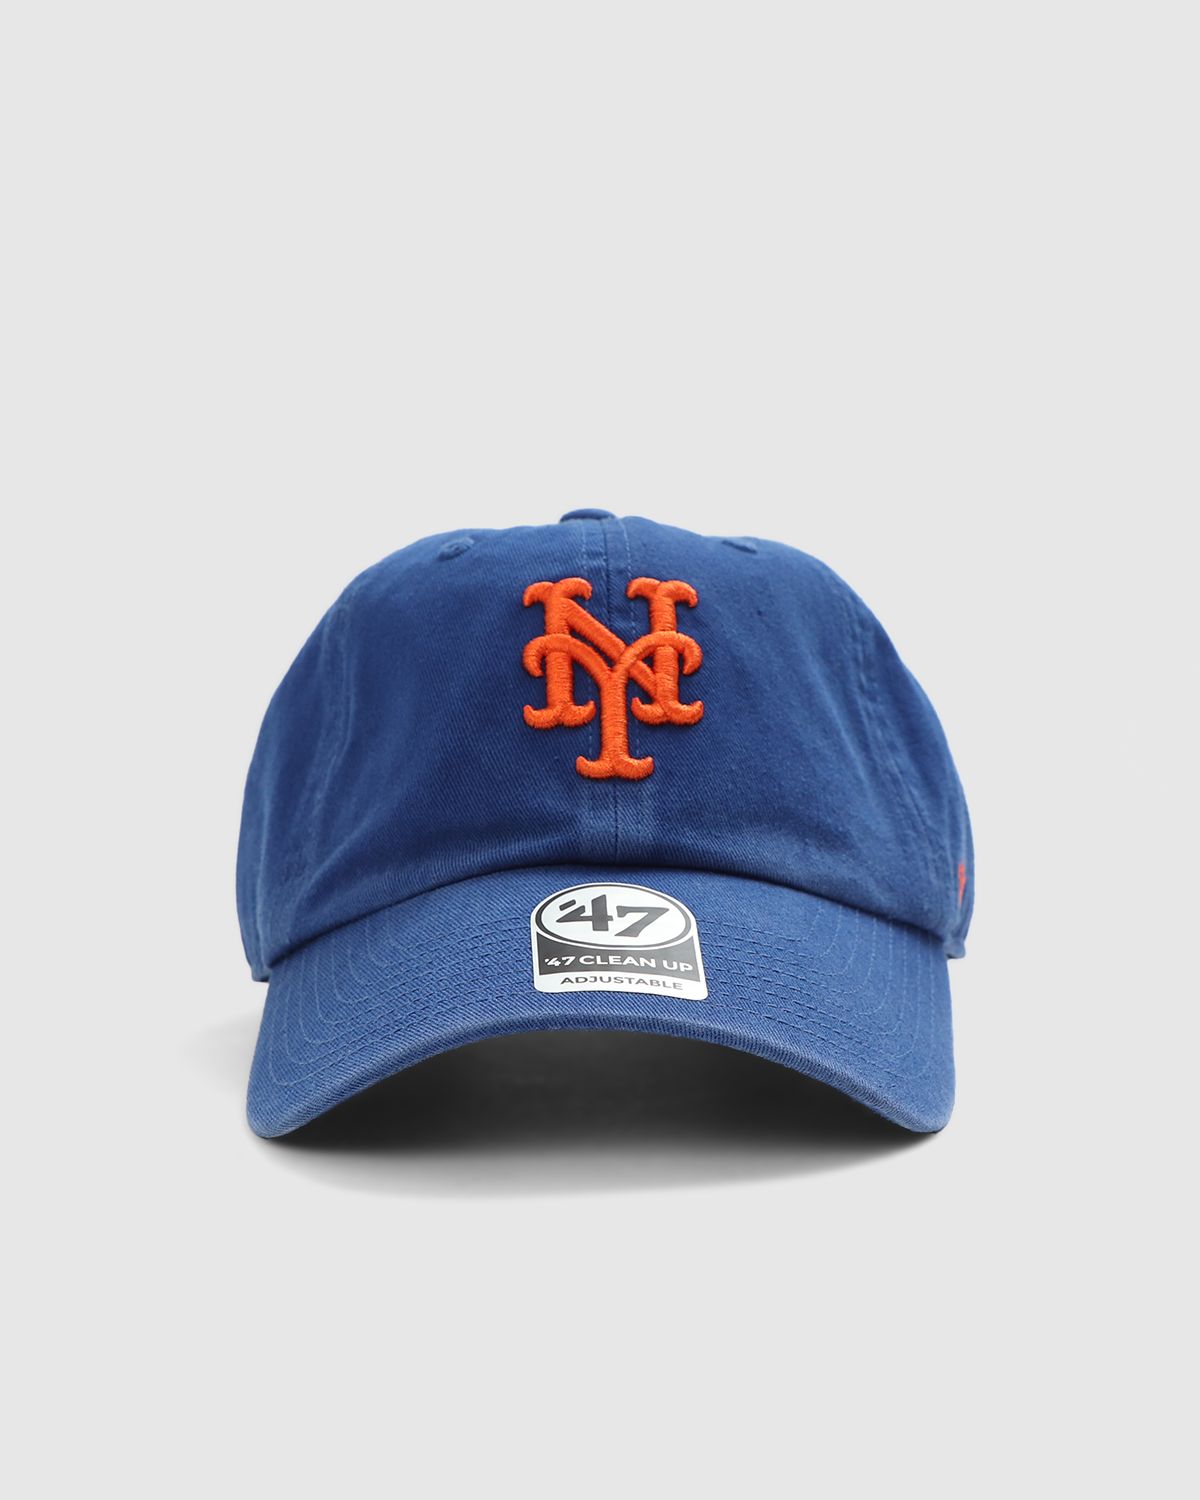 New York Mets White White Clean Up Adjustable Hat, Adult One Size Fits All